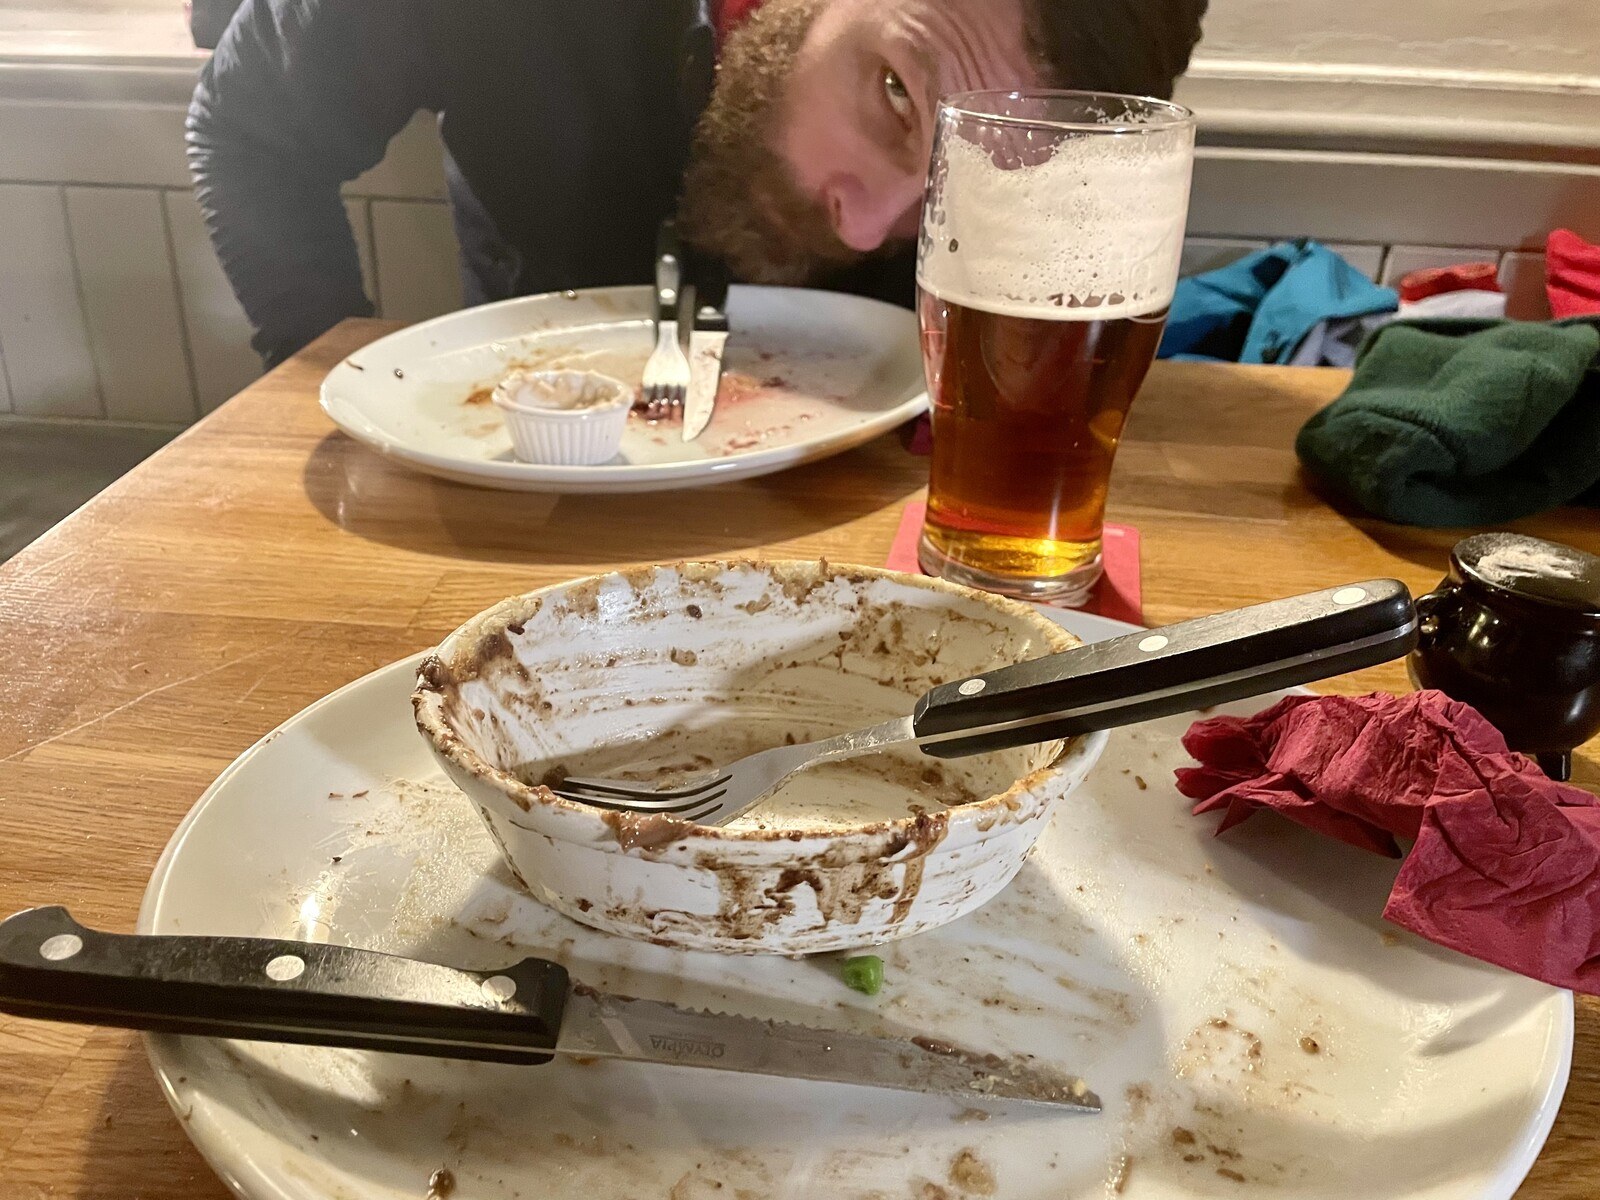 A pair of empty plates and a half-finished pint, me bent over to fit into the picture frame